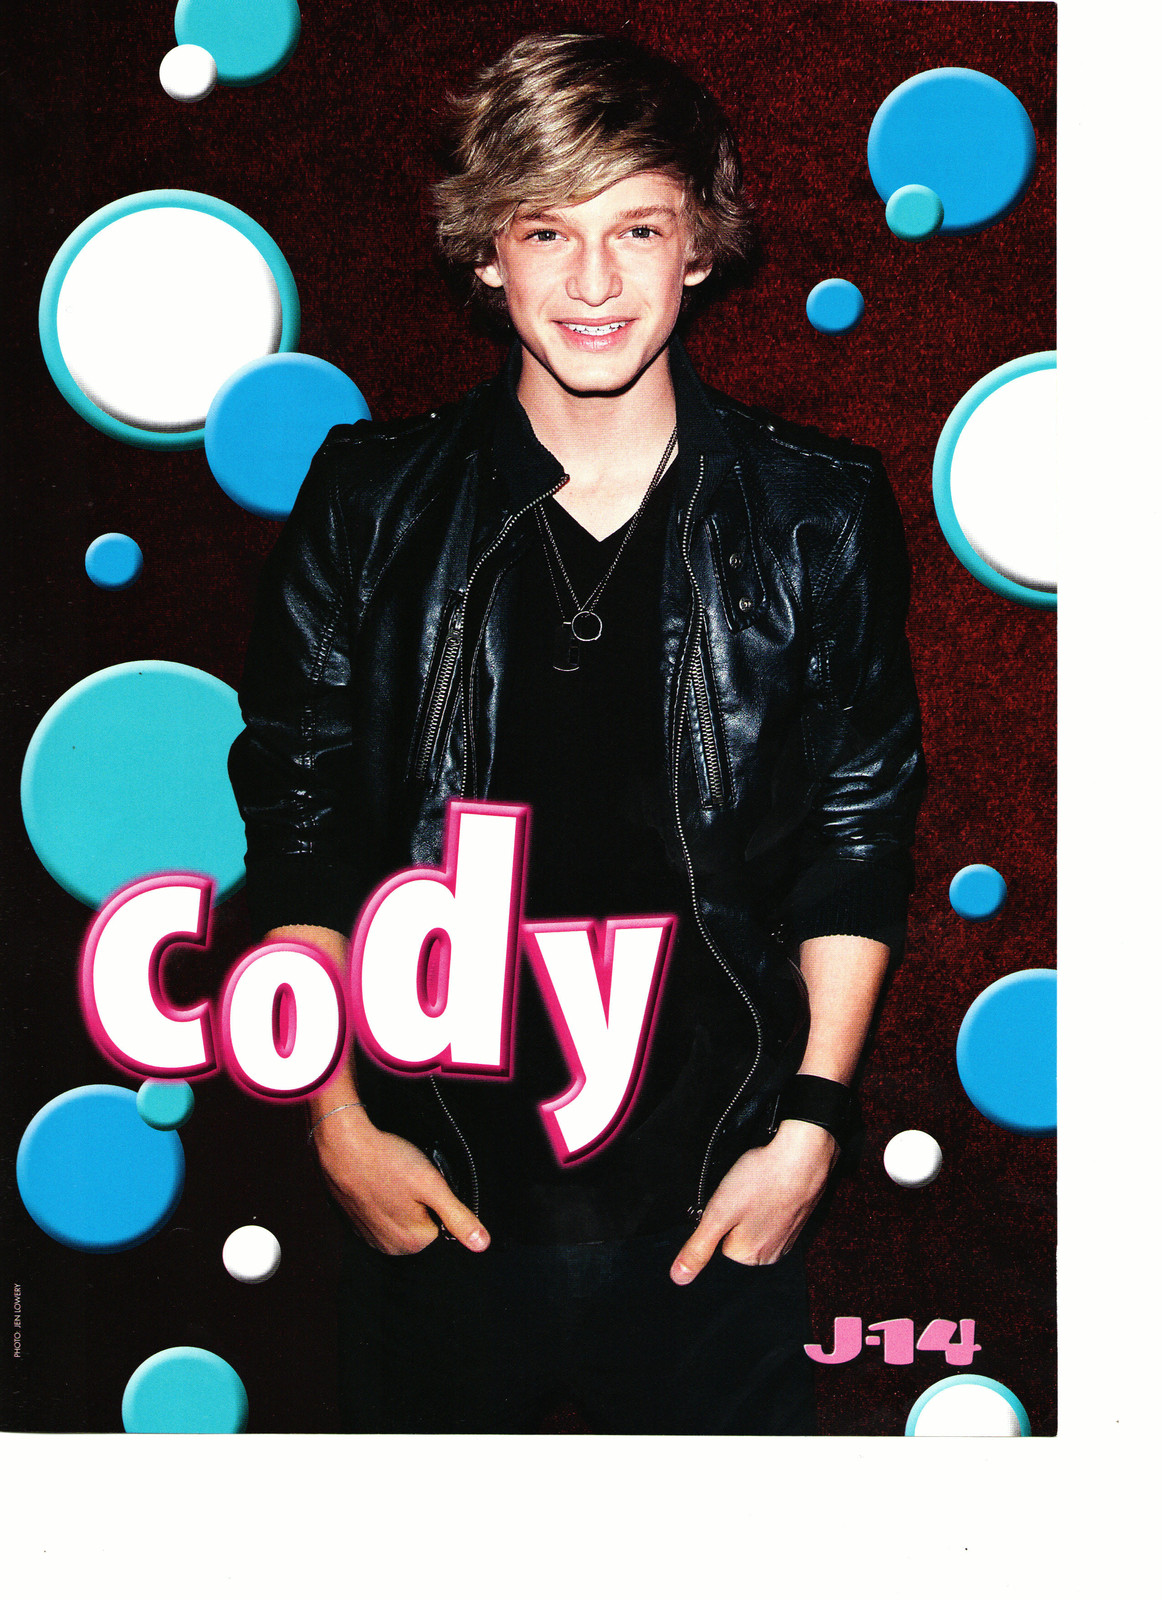 Primary image for Cody Simpson teen magazine pinup clipping black leather jacket J-14 smile at me